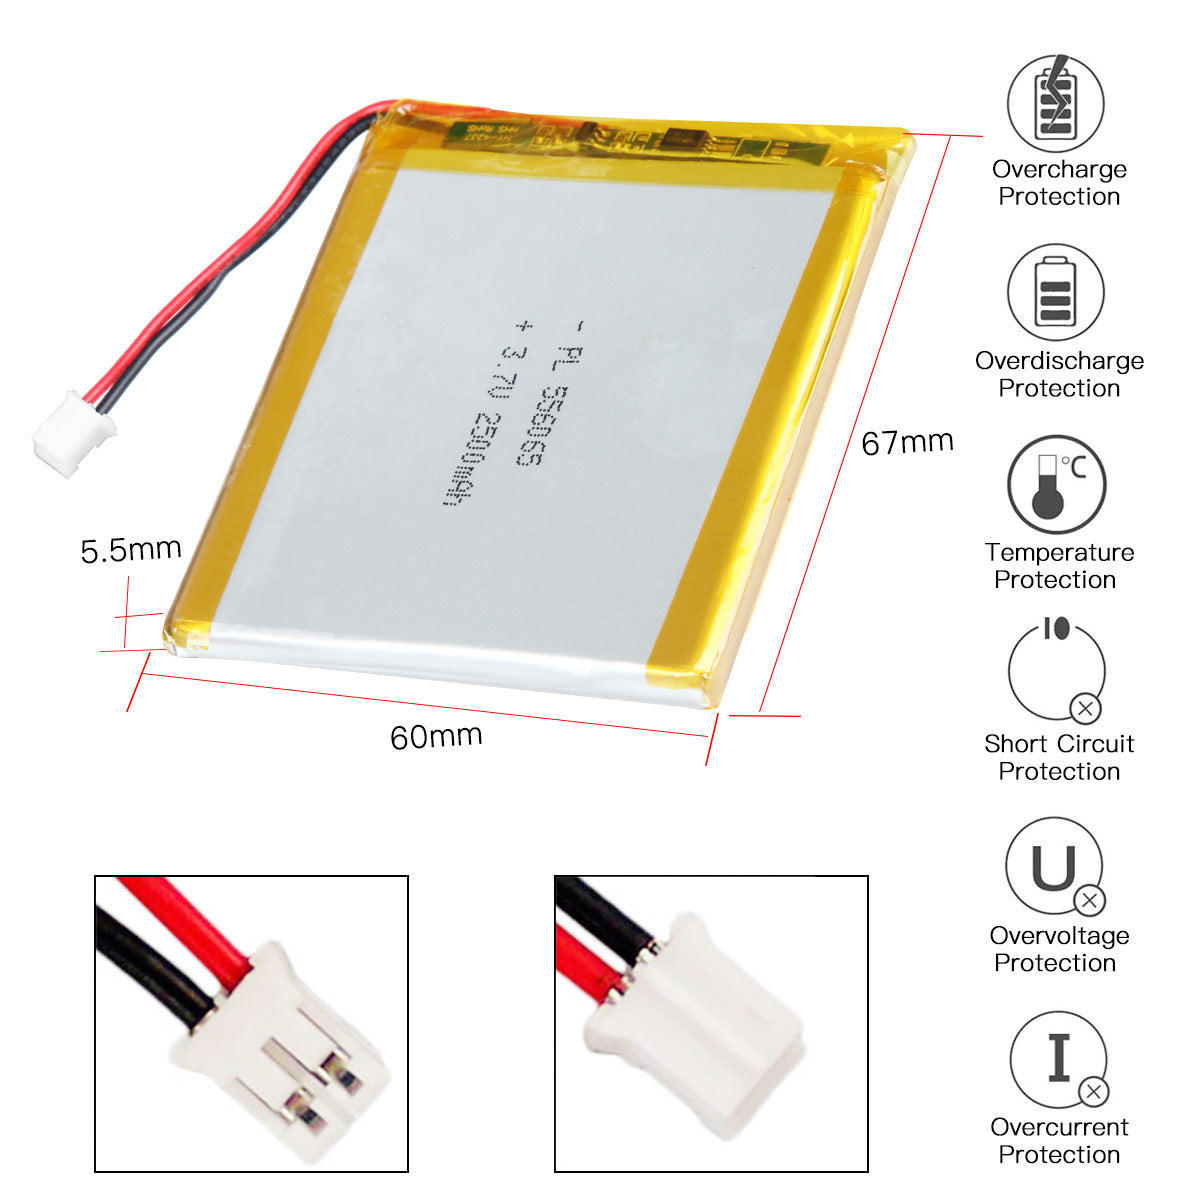 YDL 3.7V 2500mAh 556065 Rechargeable Lipo Battery with JST Connector - YDL Battery